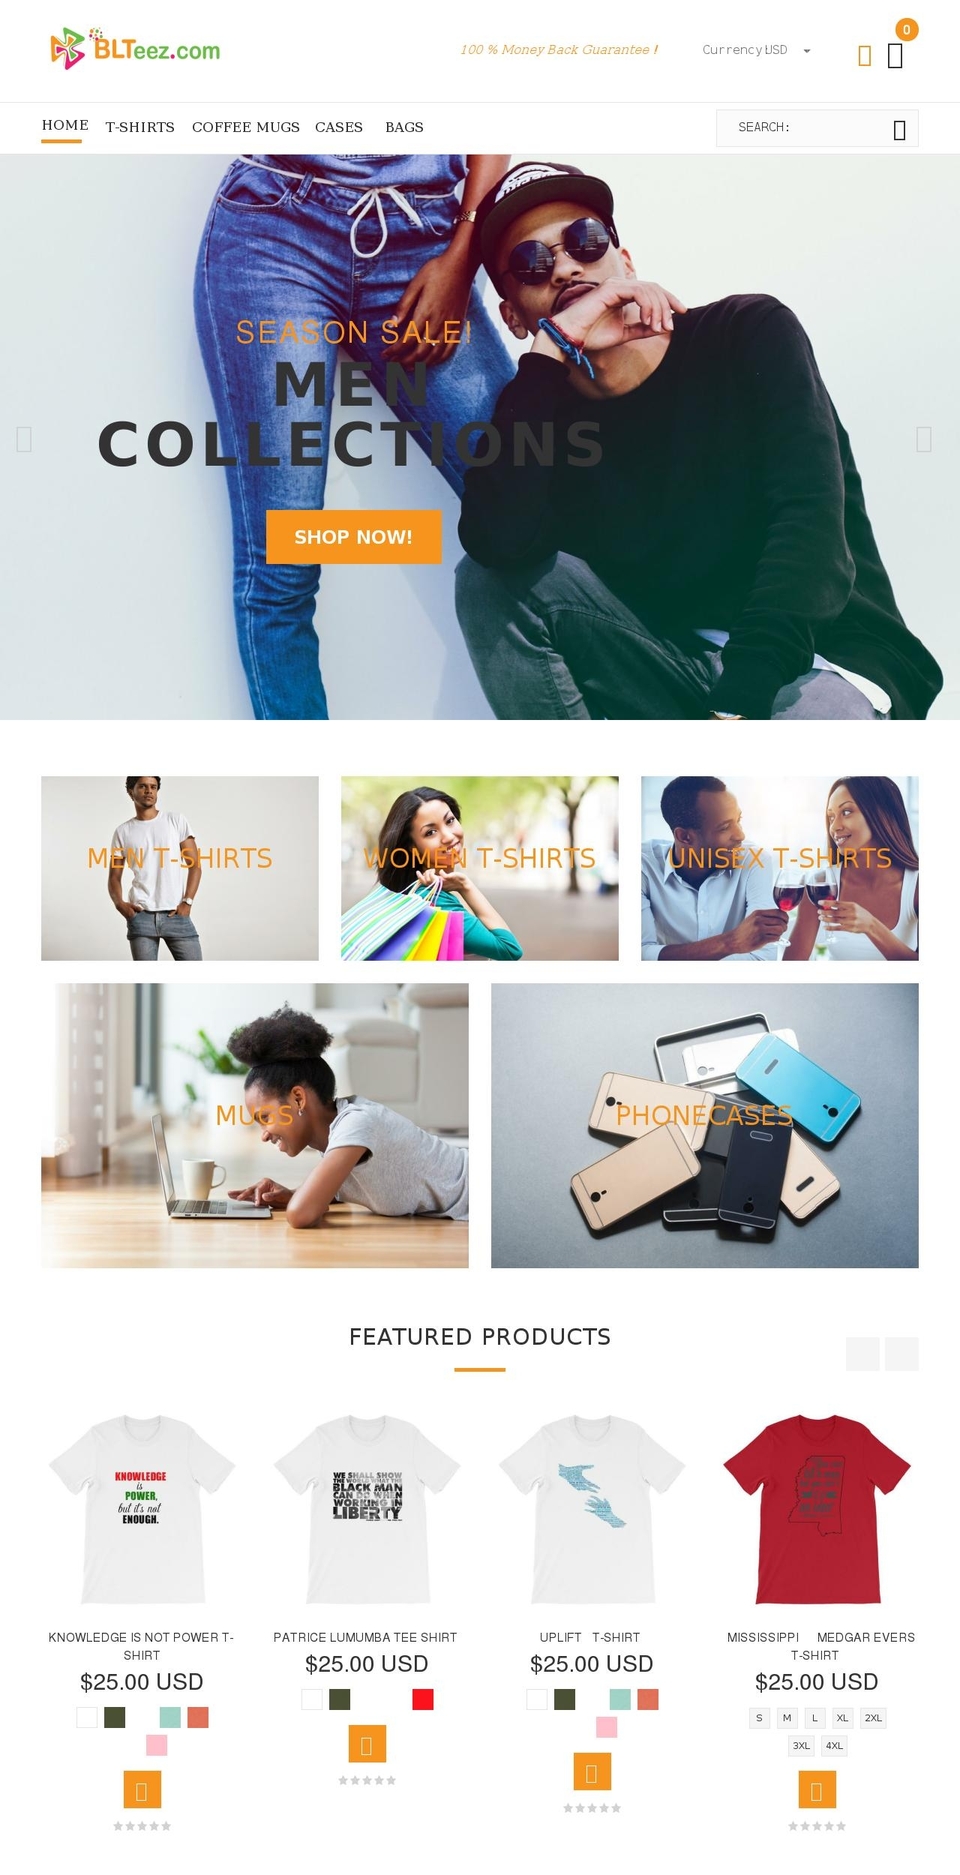 YourStore Shopify theme site example blteez.com